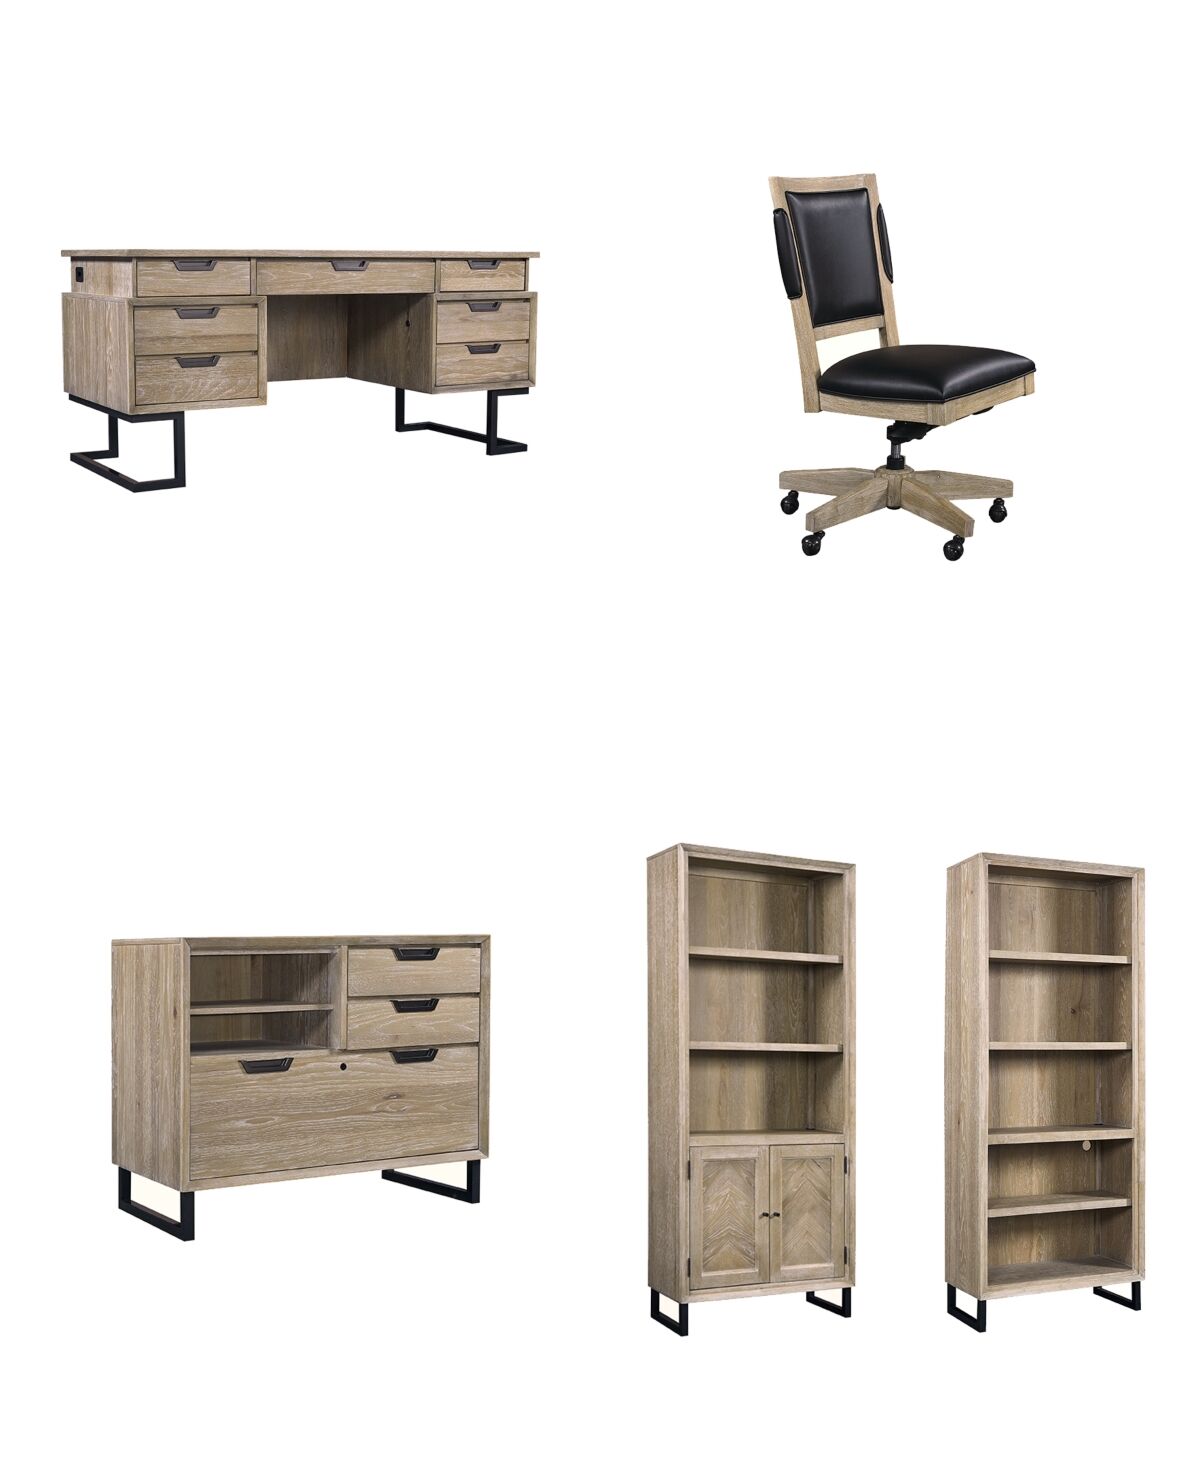 Furniture Gidian Home Office, 5-Pc. Set (Executive Desk, Office Chair, Open Bookcase, Open Bookcase, Door Bookcase) - Bleached Khaki